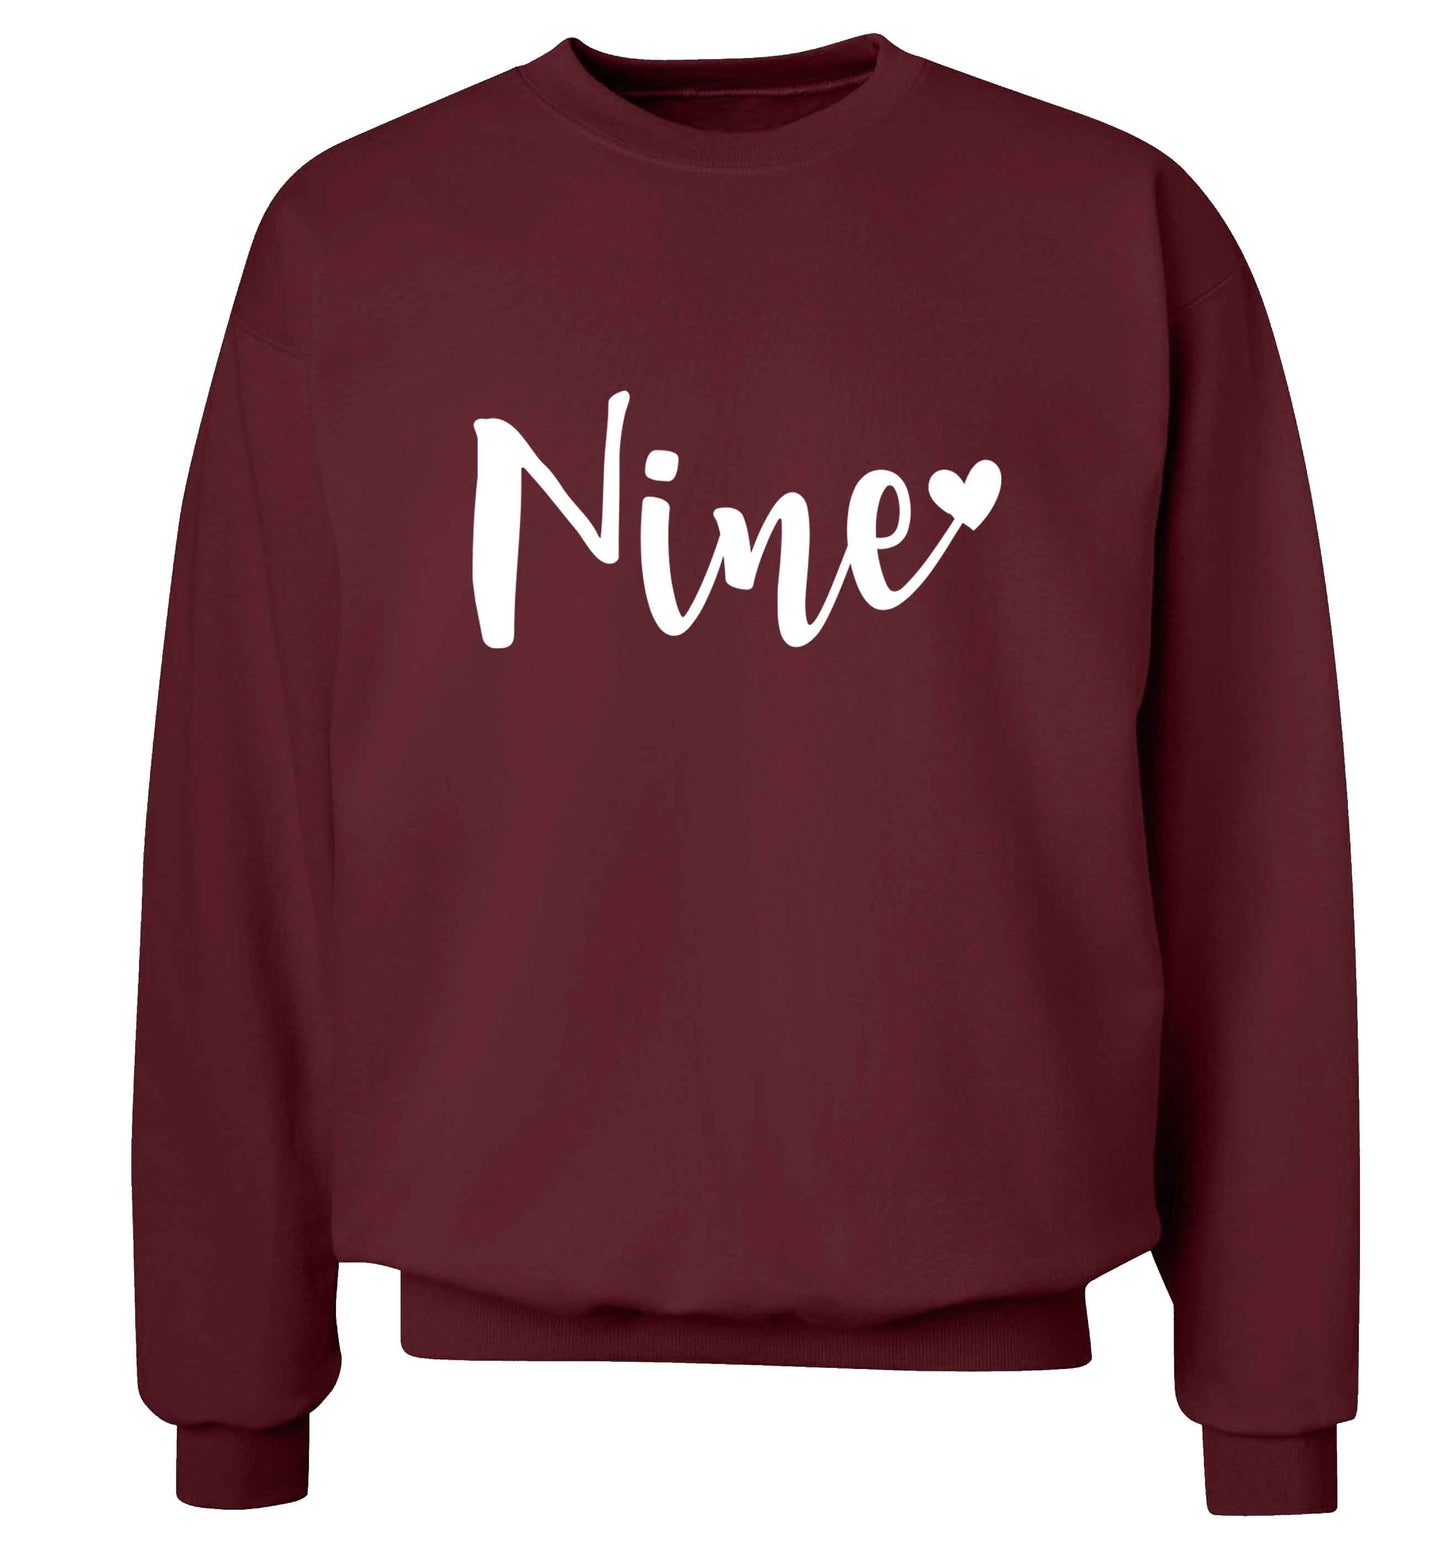 Nine and heart adult's unisex maroon sweater 2XL